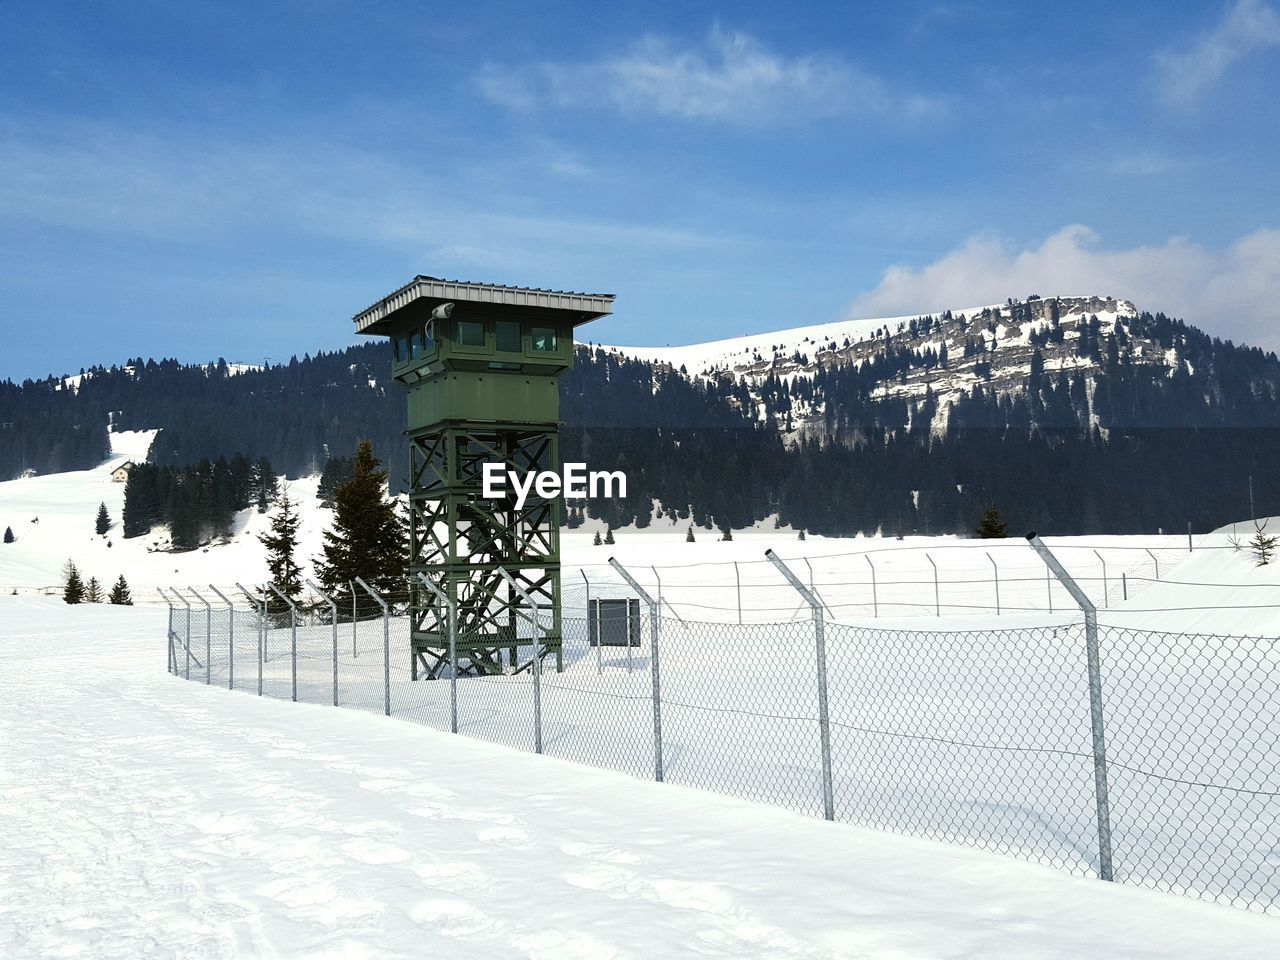 Lookout tower on snowcapped field during winter